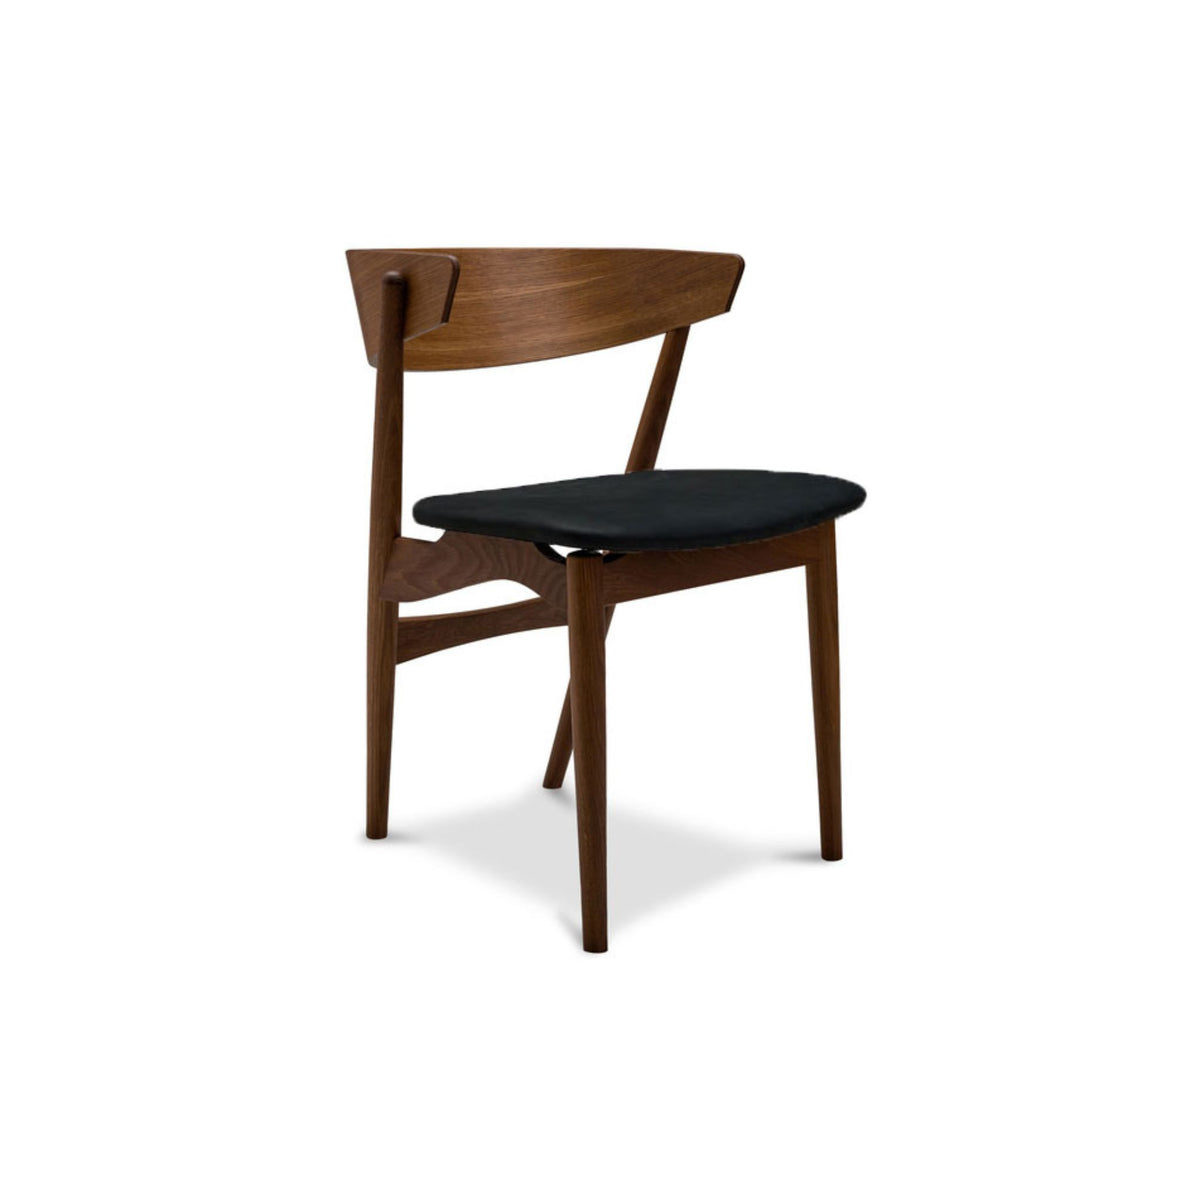 Sibast No. 7 Dining Chair, Upholstered Seat